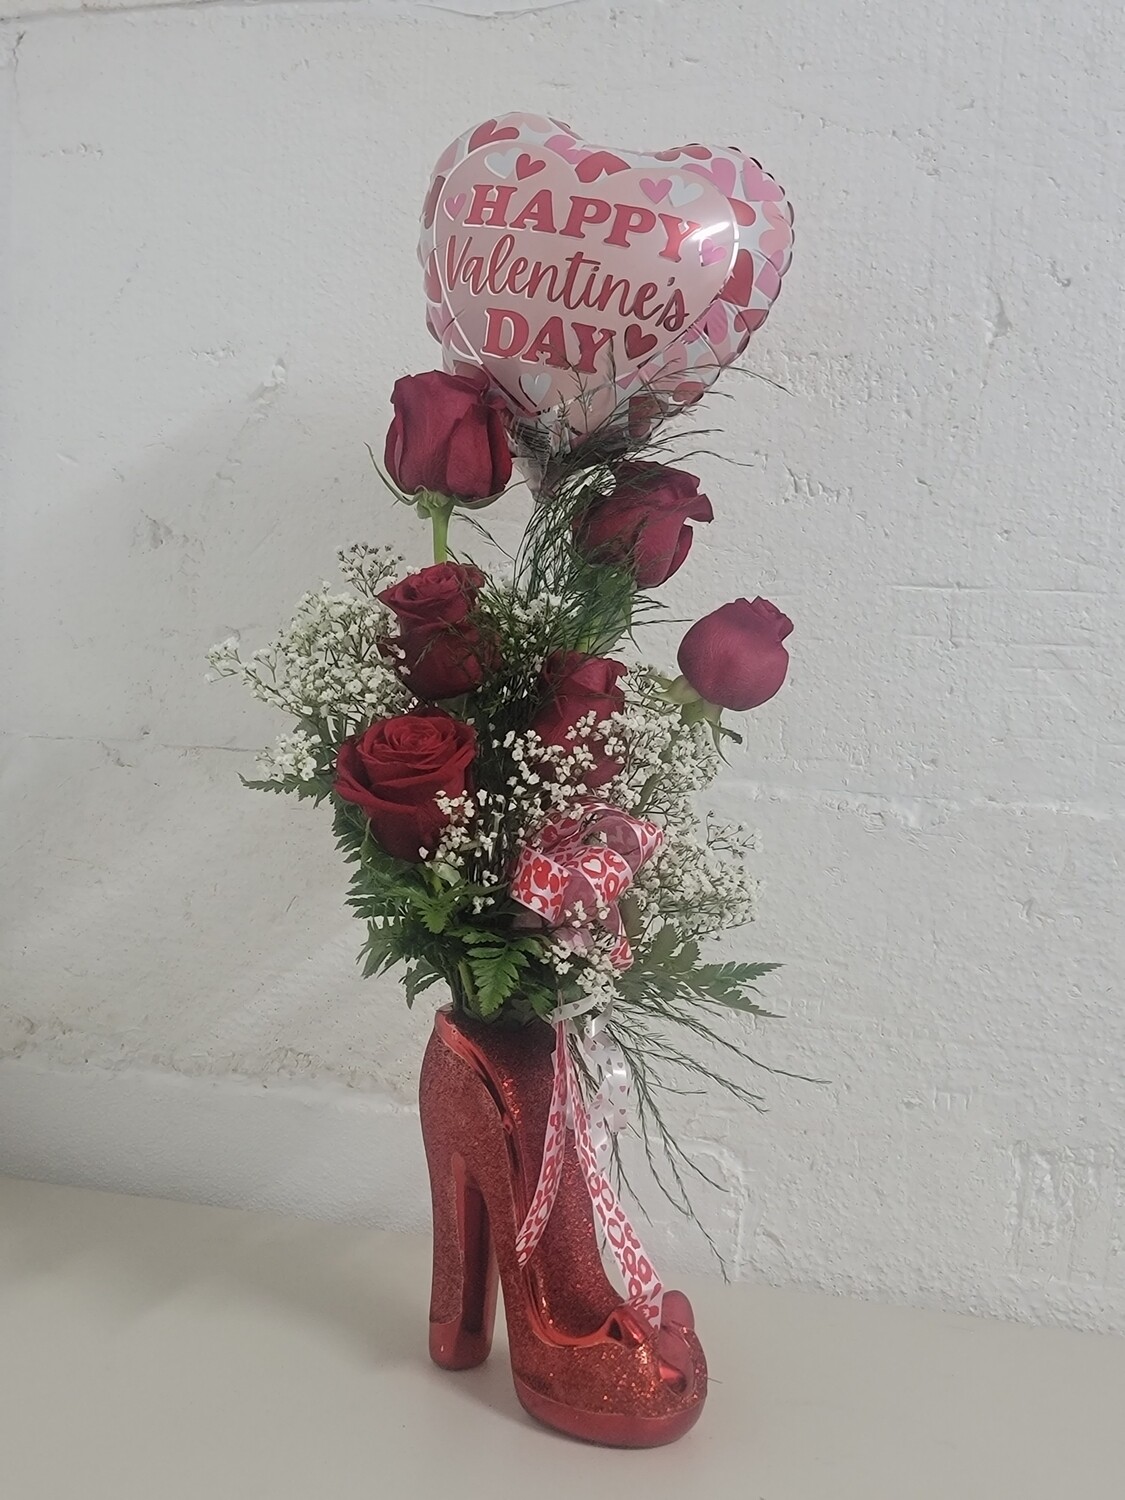 6 roses and a balloon in a red shoe vase